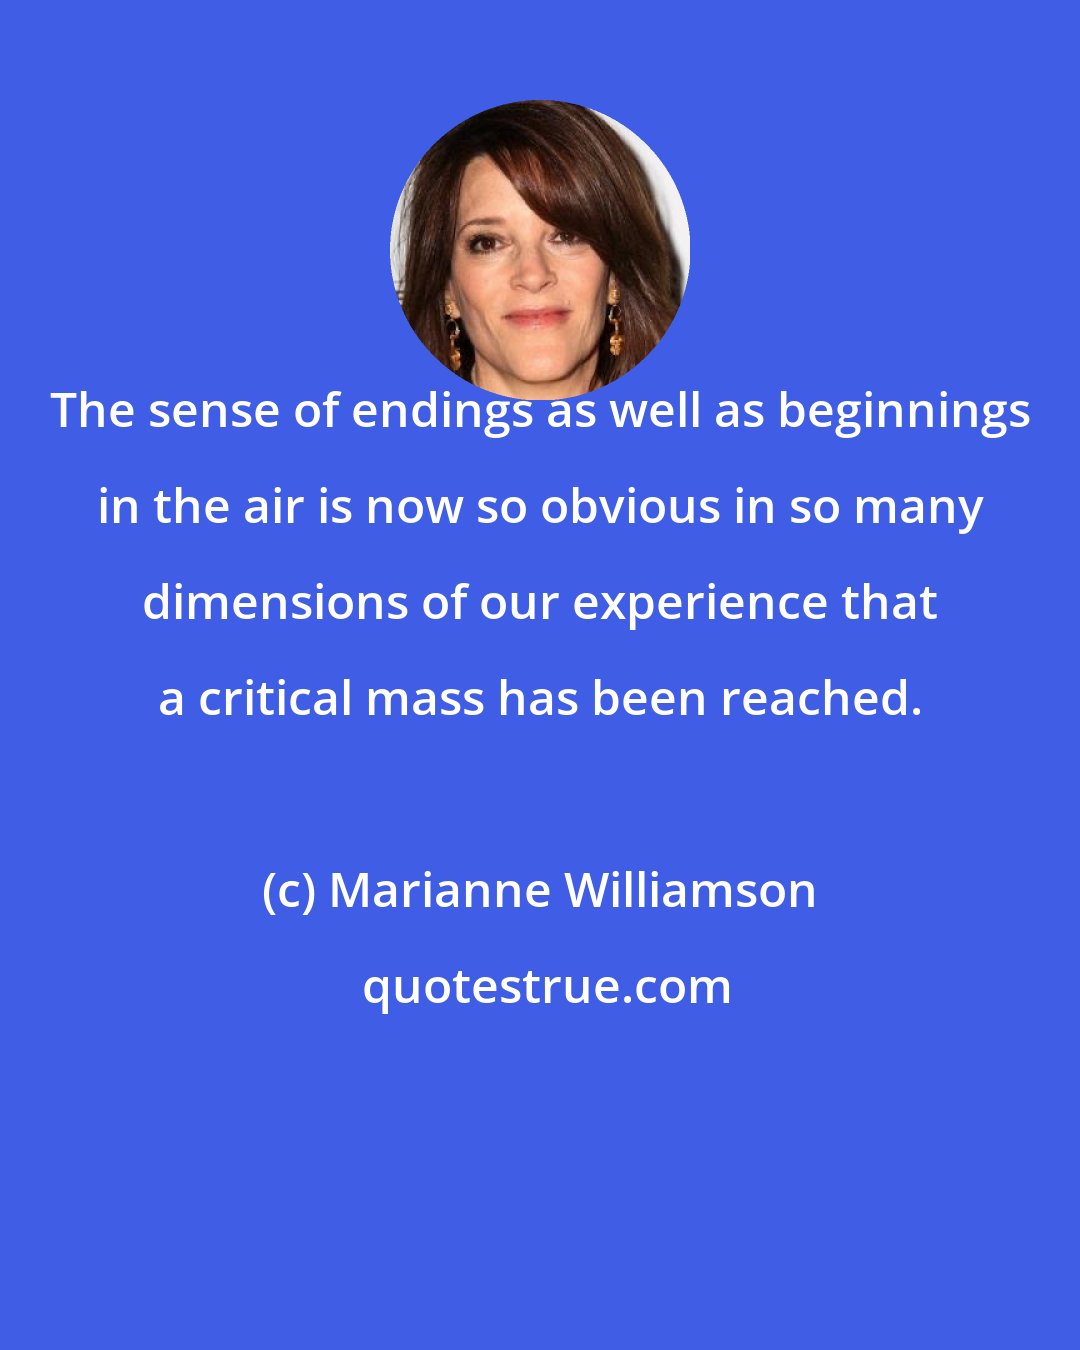 Marianne Williamson: The sense of endings as well as beginnings in the air is now so obvious in so many dimensions of our experience that a critical mass has been reached.